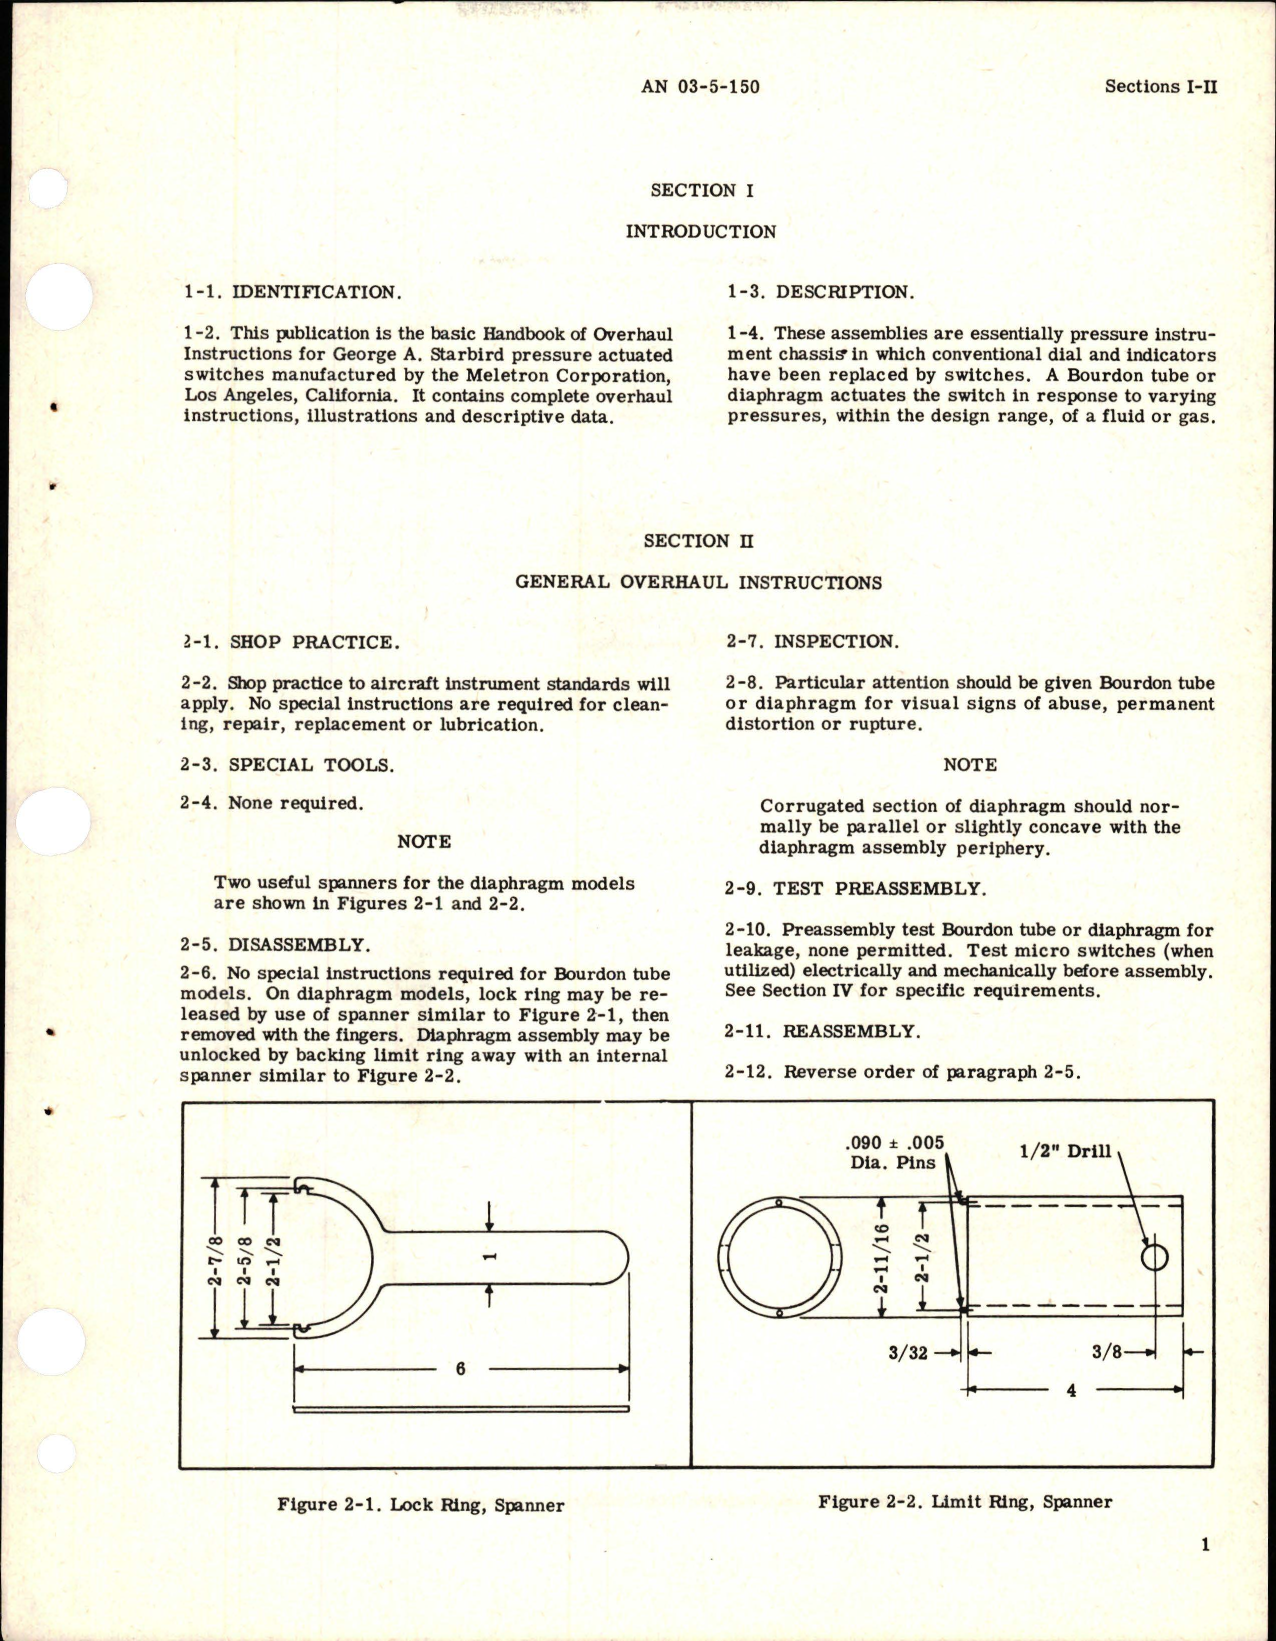 Sample page 5 from AirCorps Library document: Overhaul Instructions for Pressure Actuated Switches